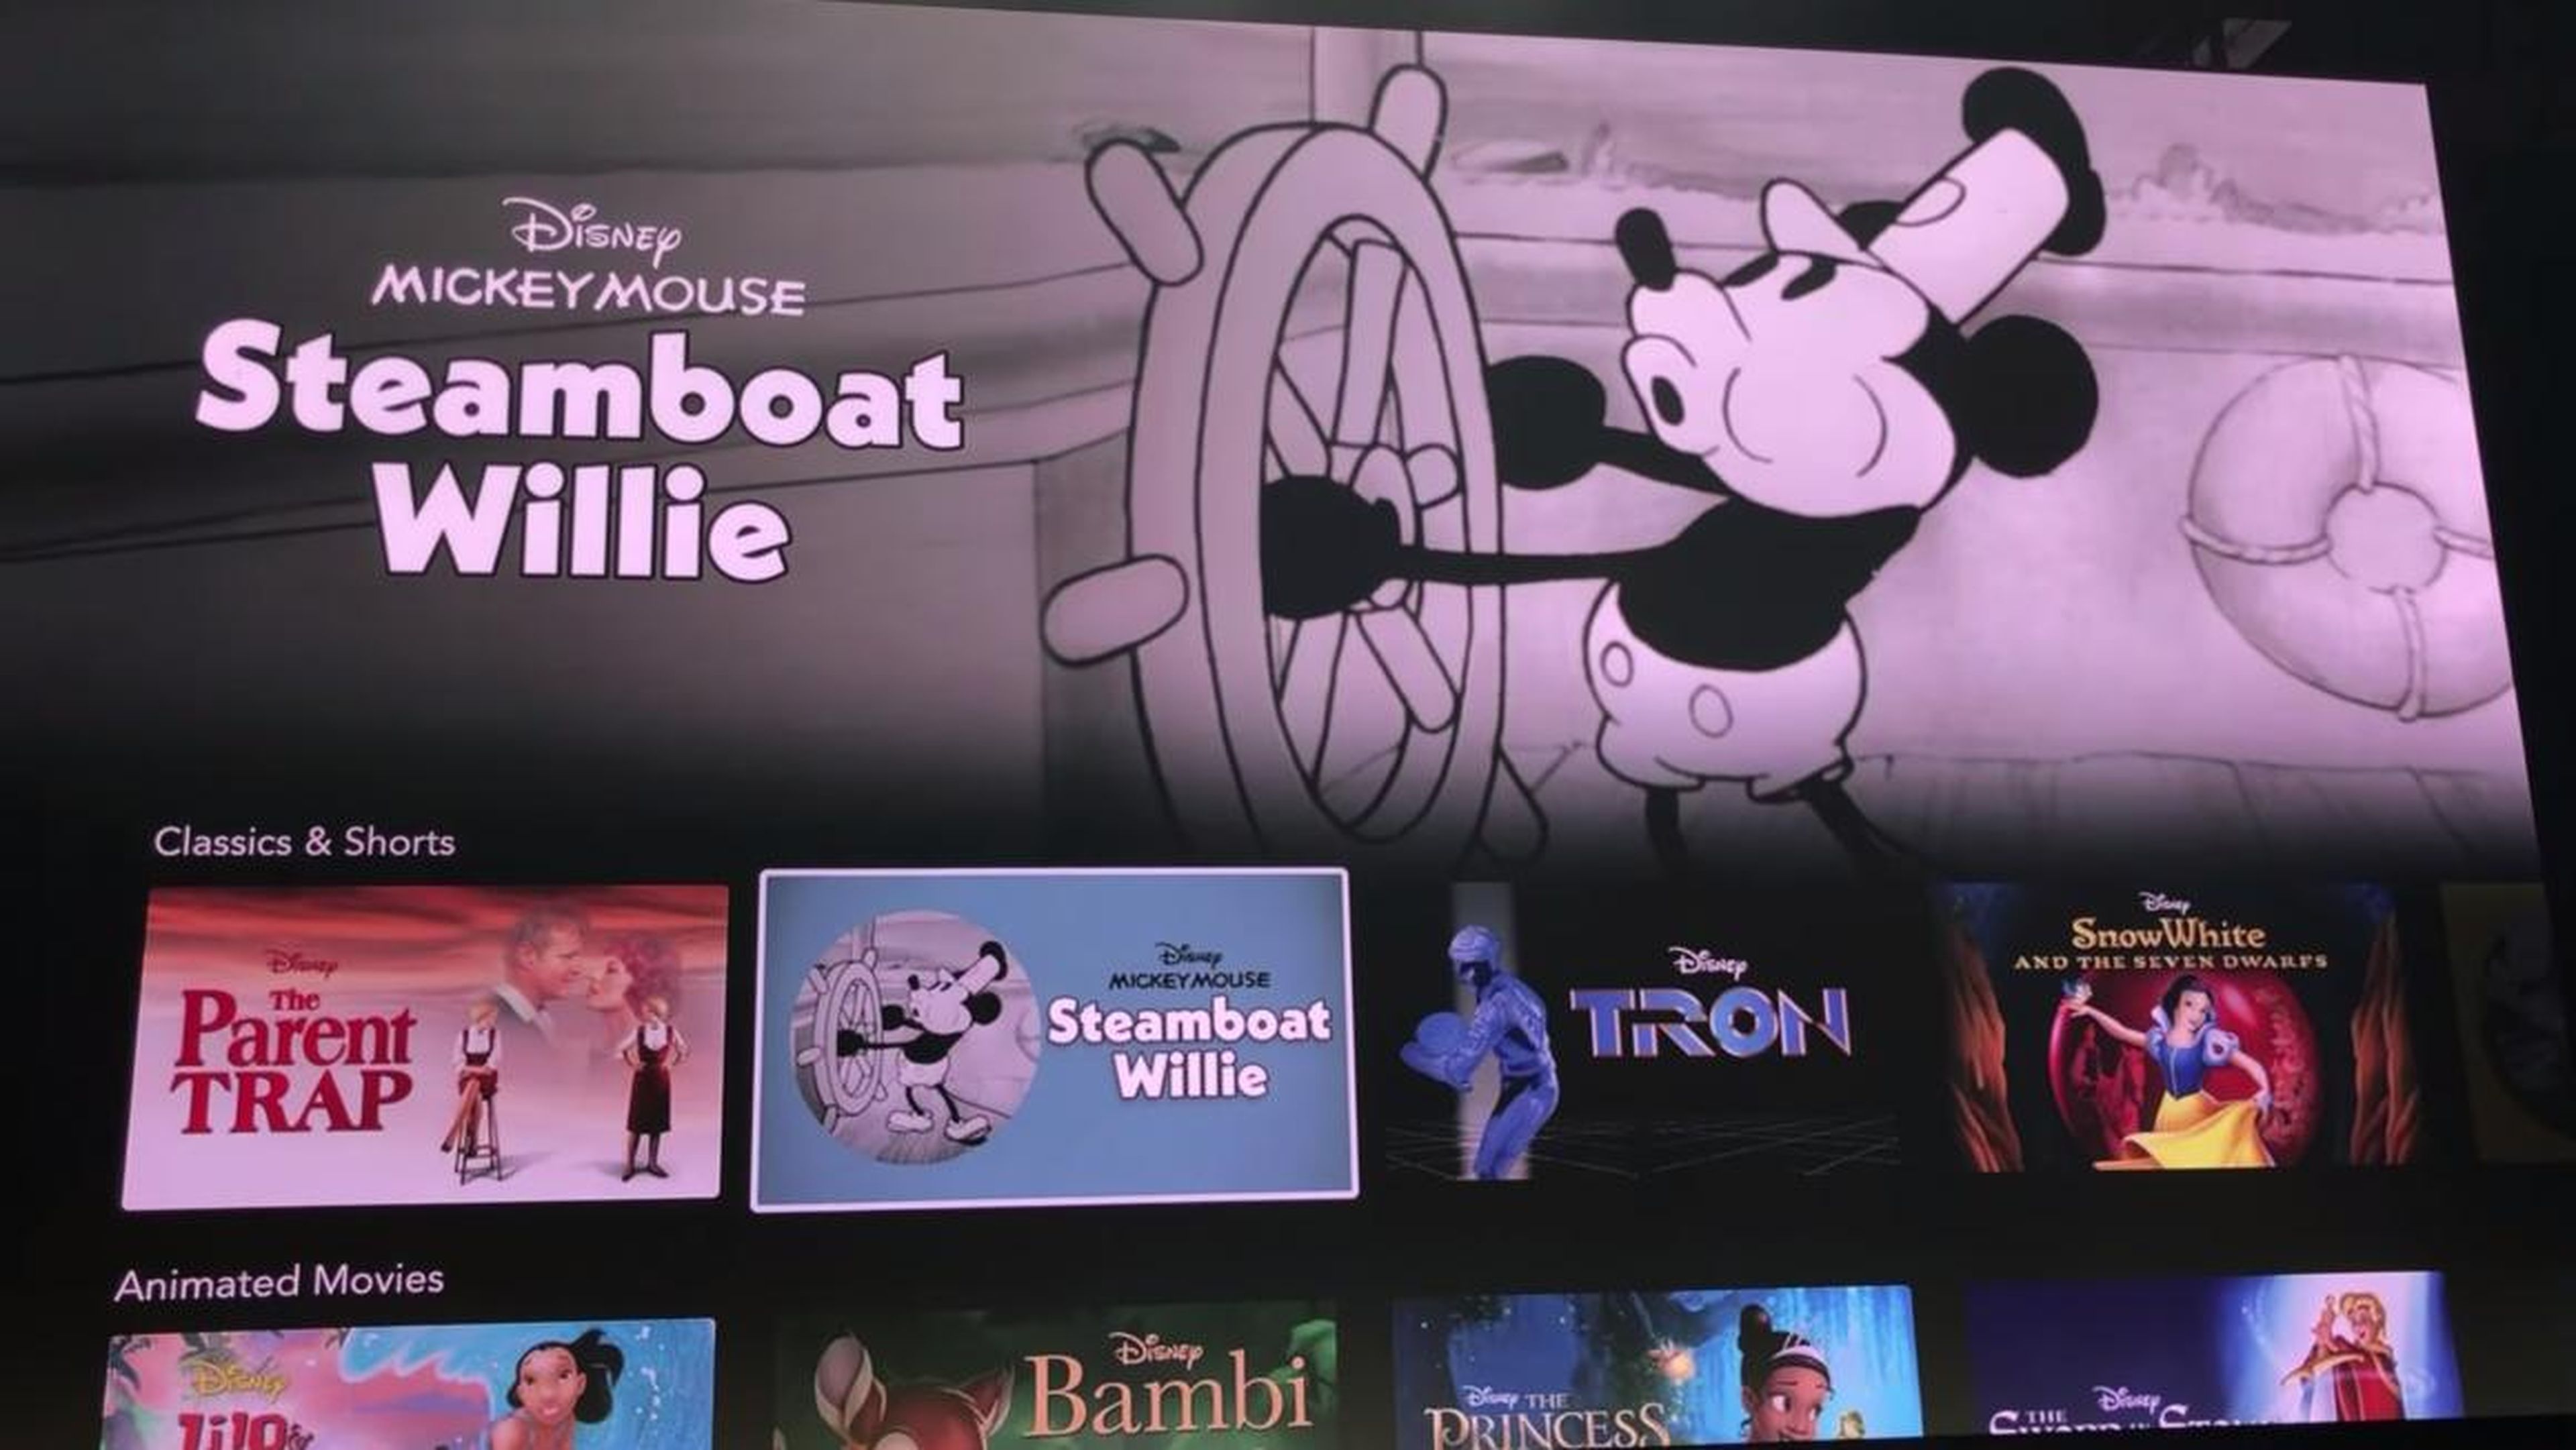 Thanks to the demo, we got to see a handful of titles confirmed for Disney Plus, including old favorites like "The Parent Trap" and "Steamboat Willie" as well as newer classics like "Moana," "Remember The Titans," and "Lilo and